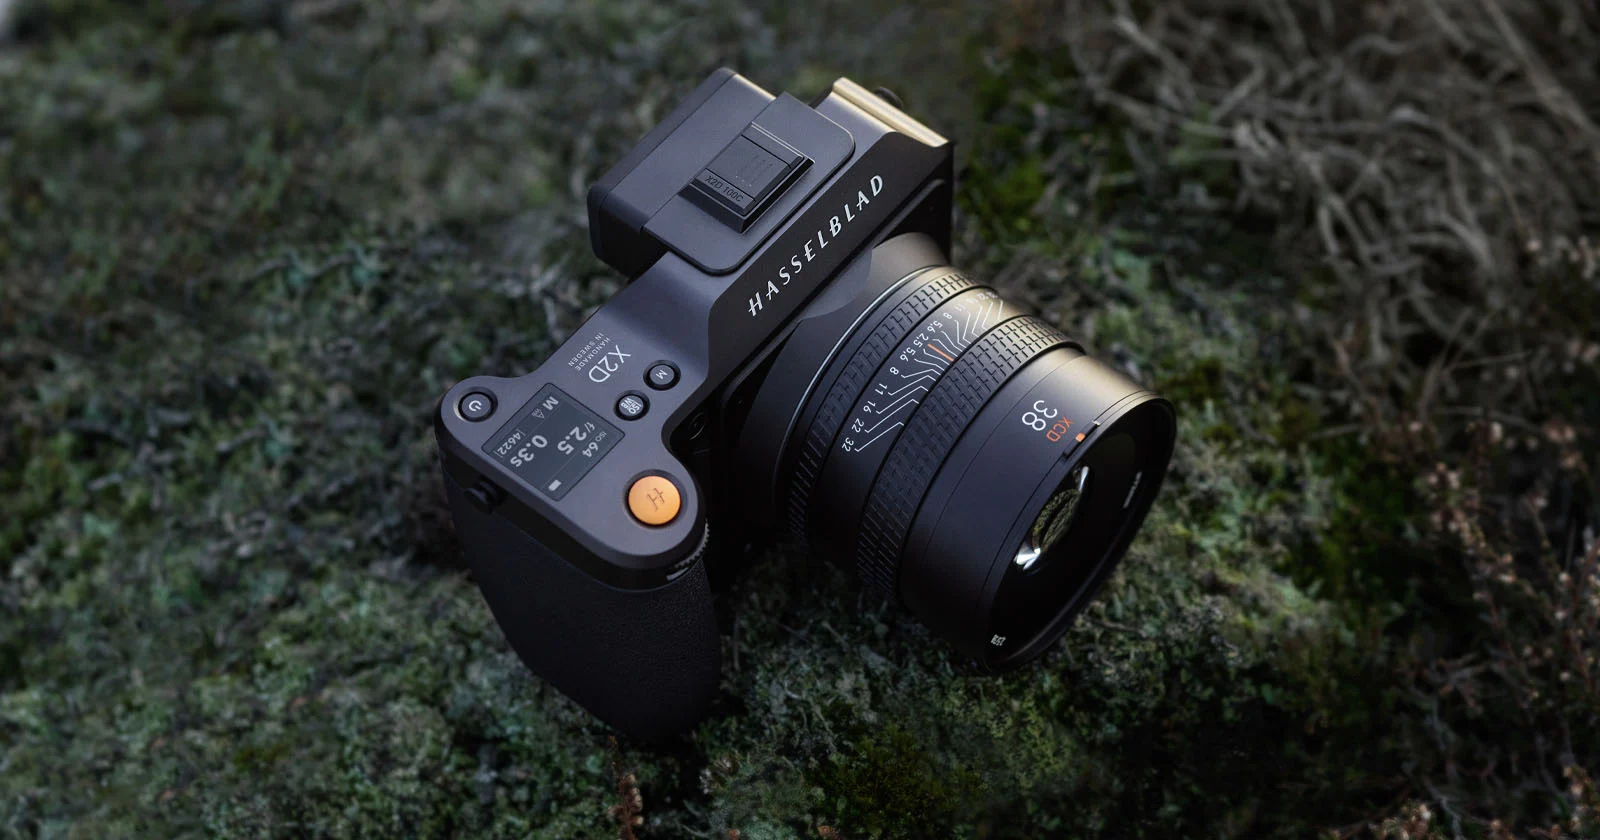 Hasselblad X1D 100C A 100MP Camera with IBIS and Hybrid AF